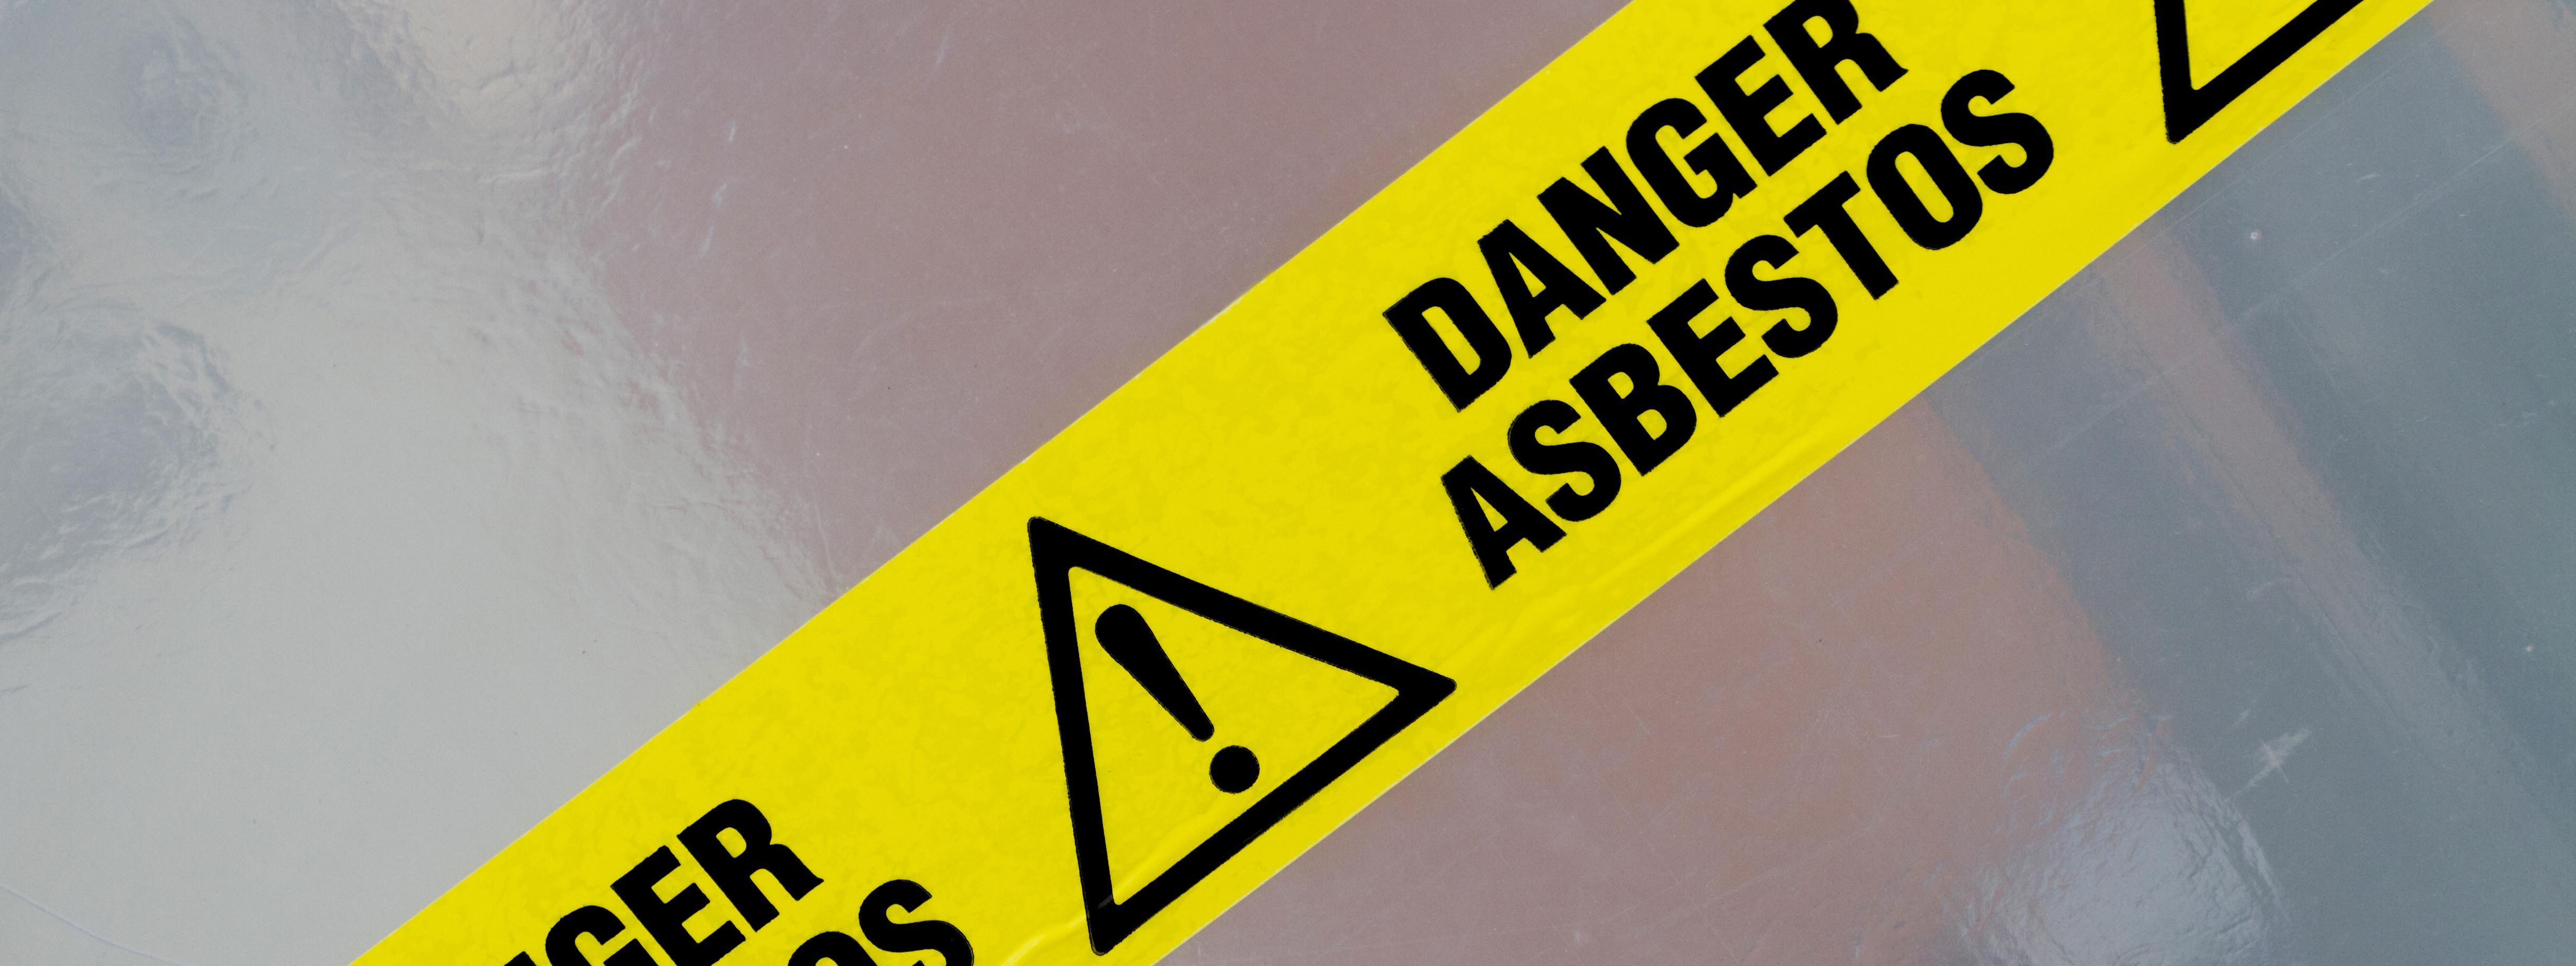 Compliance needed to stave off deadly asbestos threat